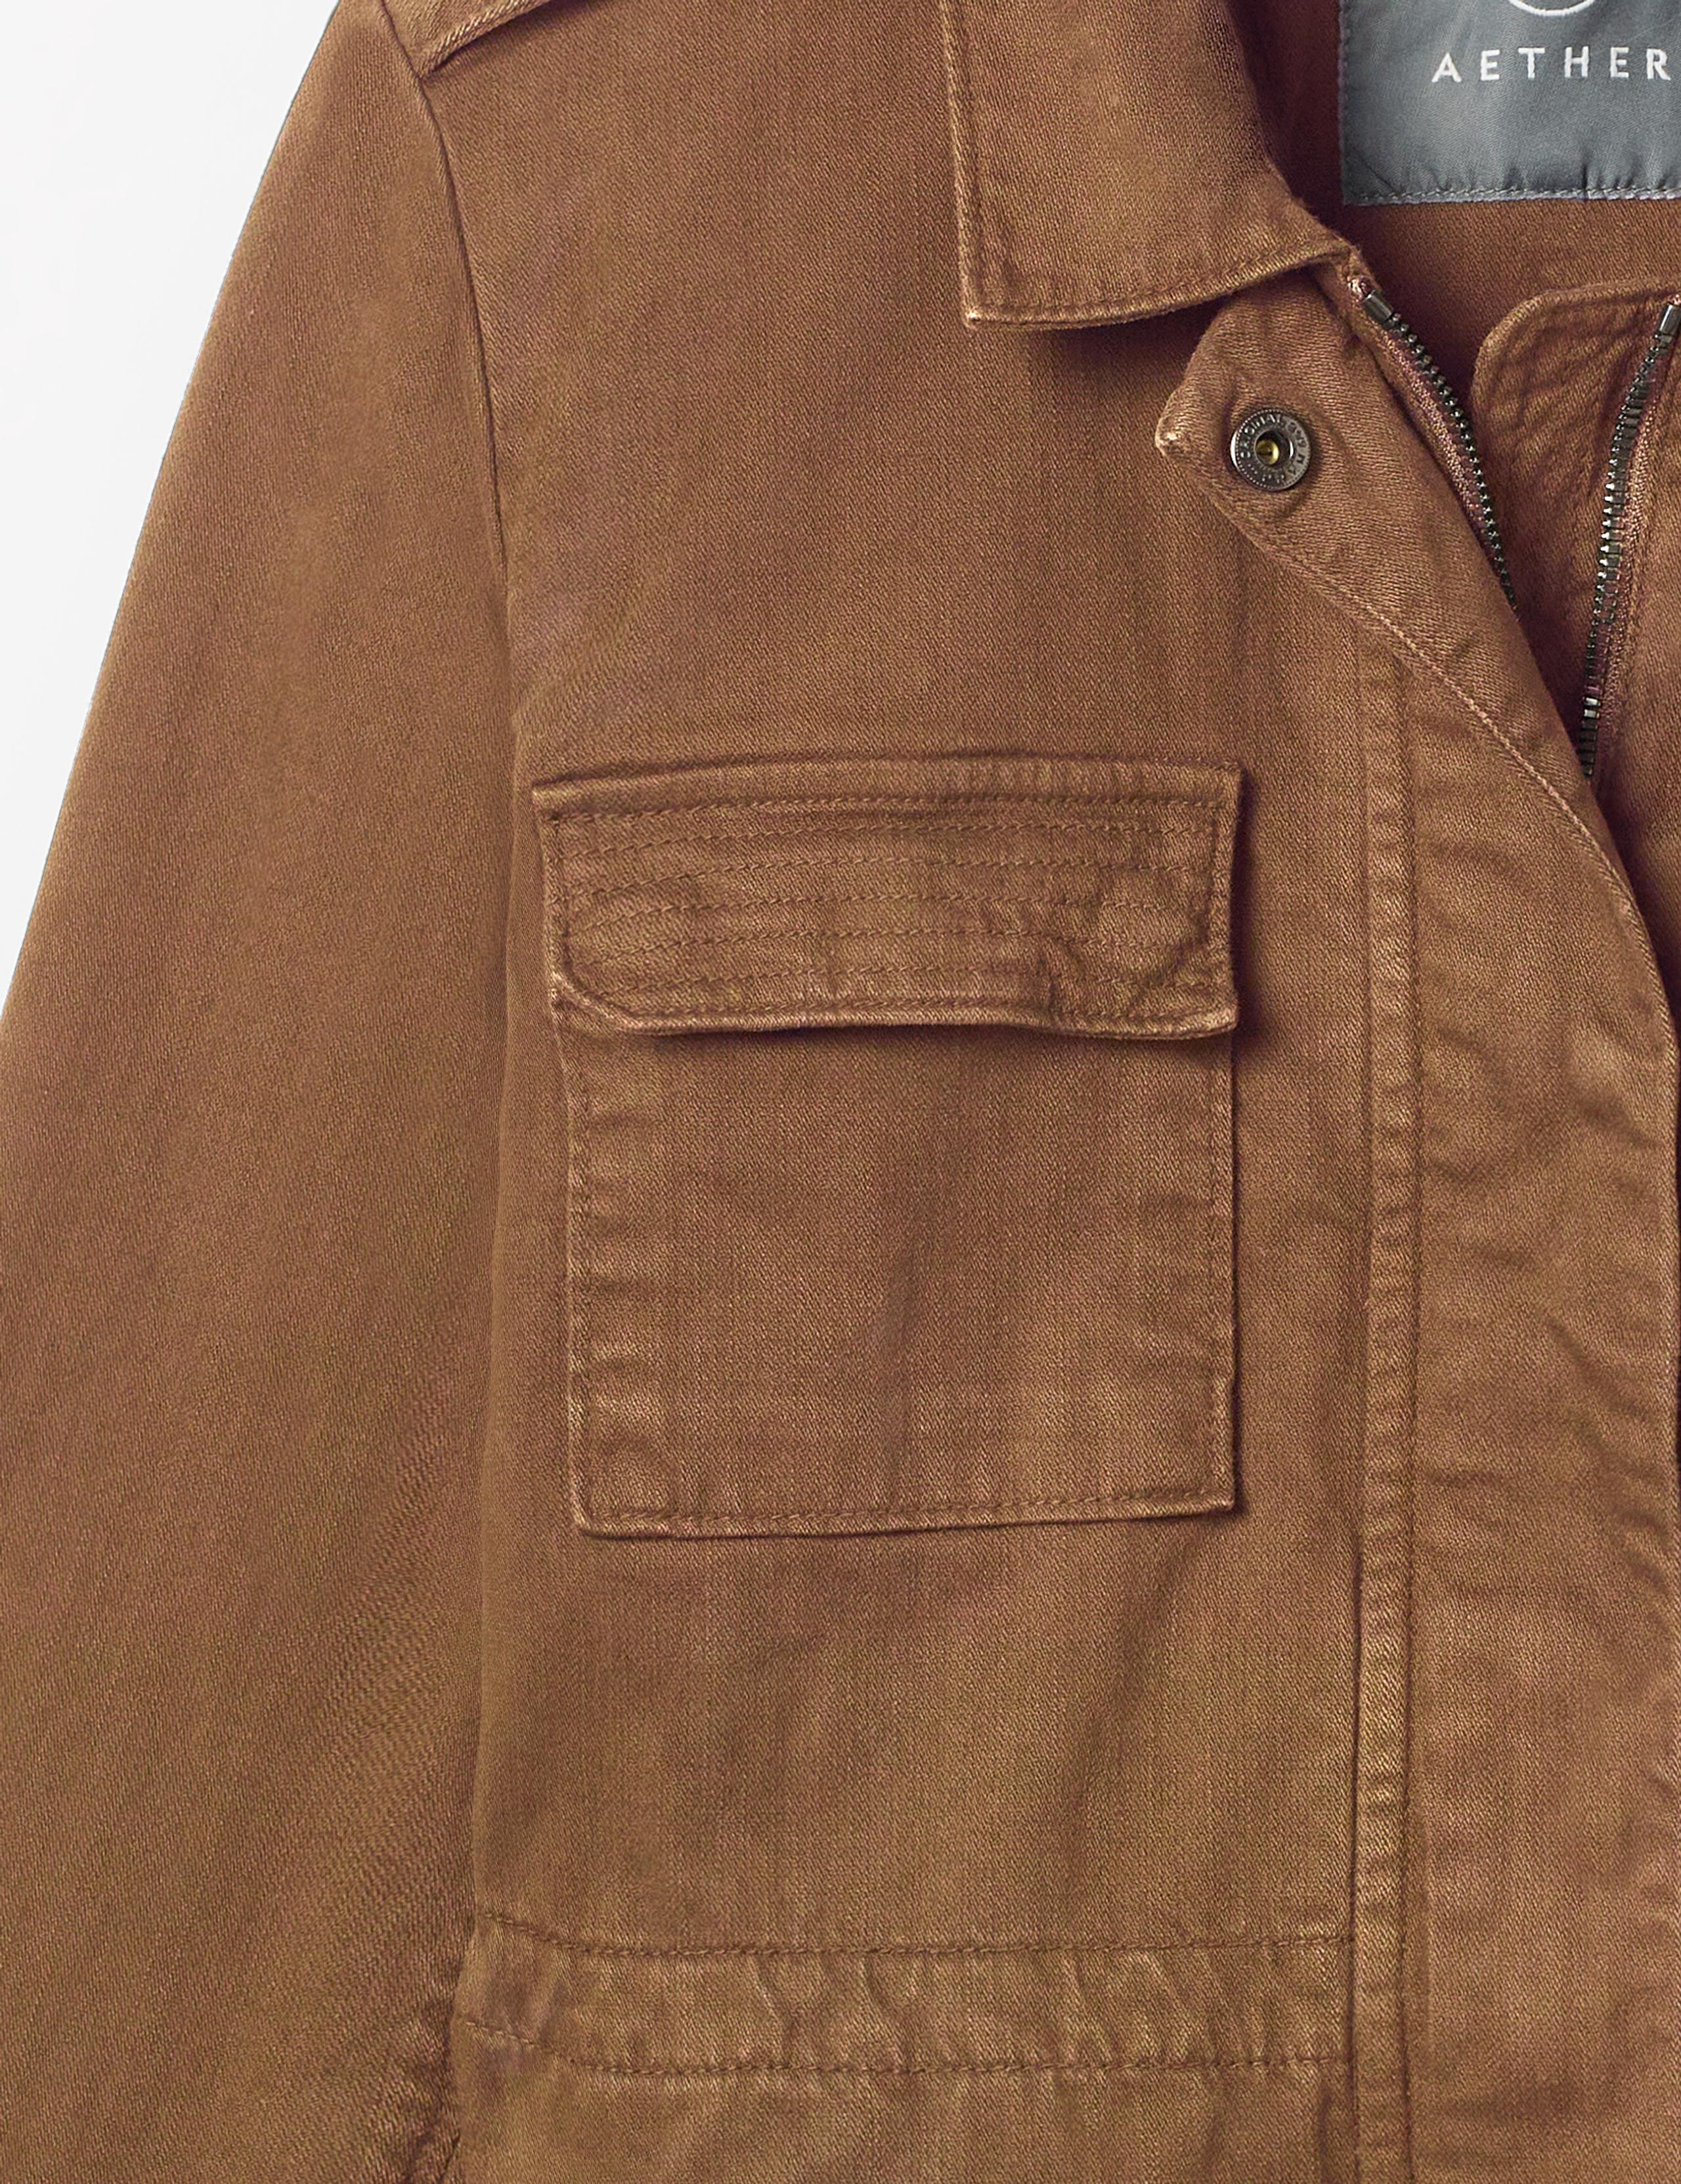 Close-up view of chest pocket